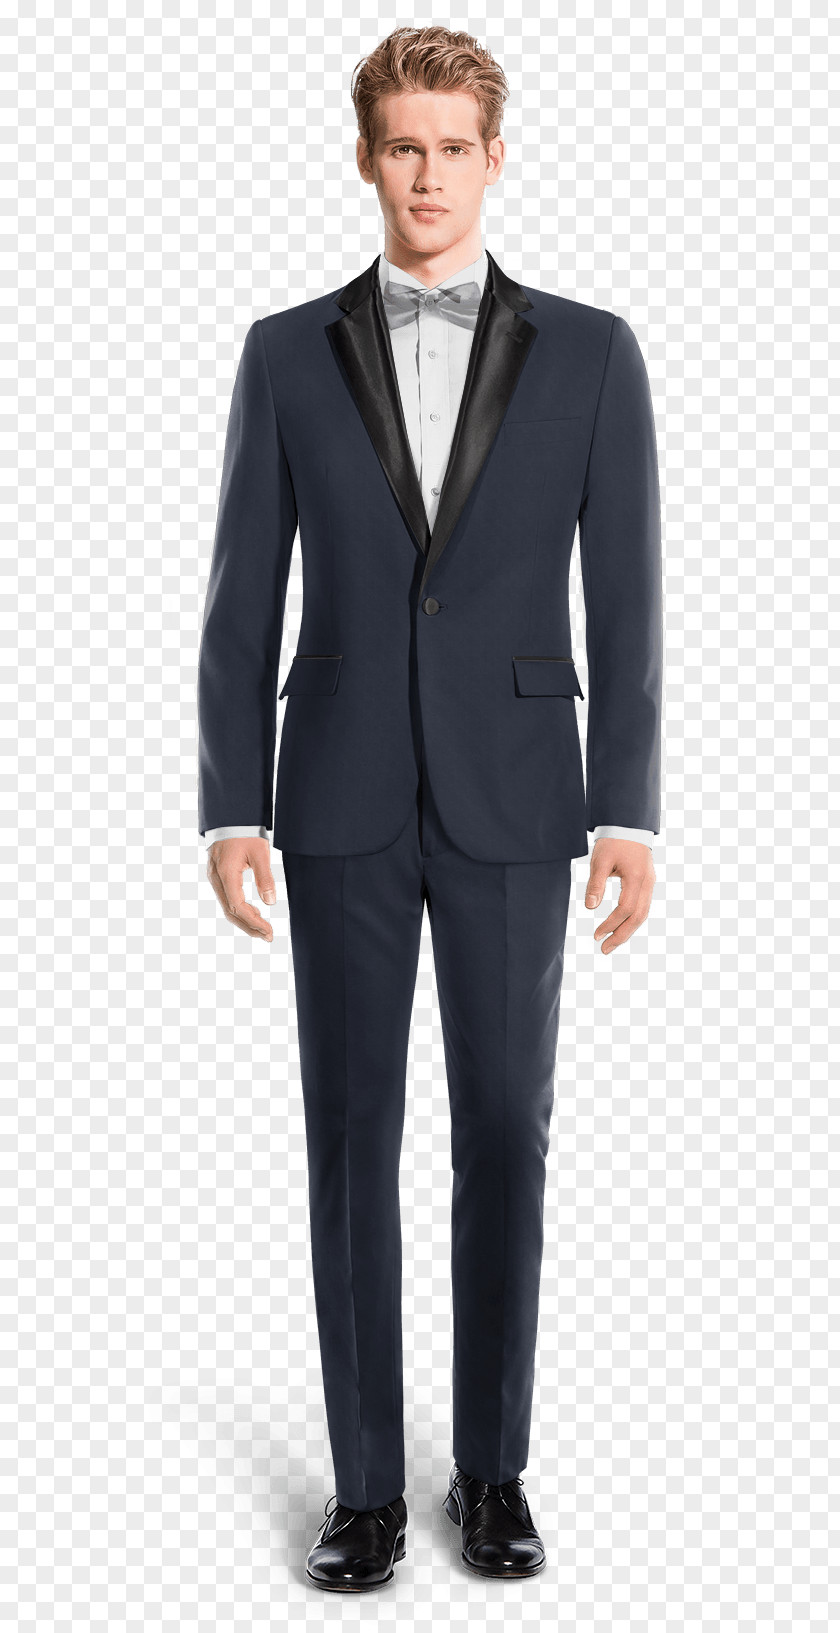 Suit Lapel Tuxedo Double-breasted Single-breasted PNG